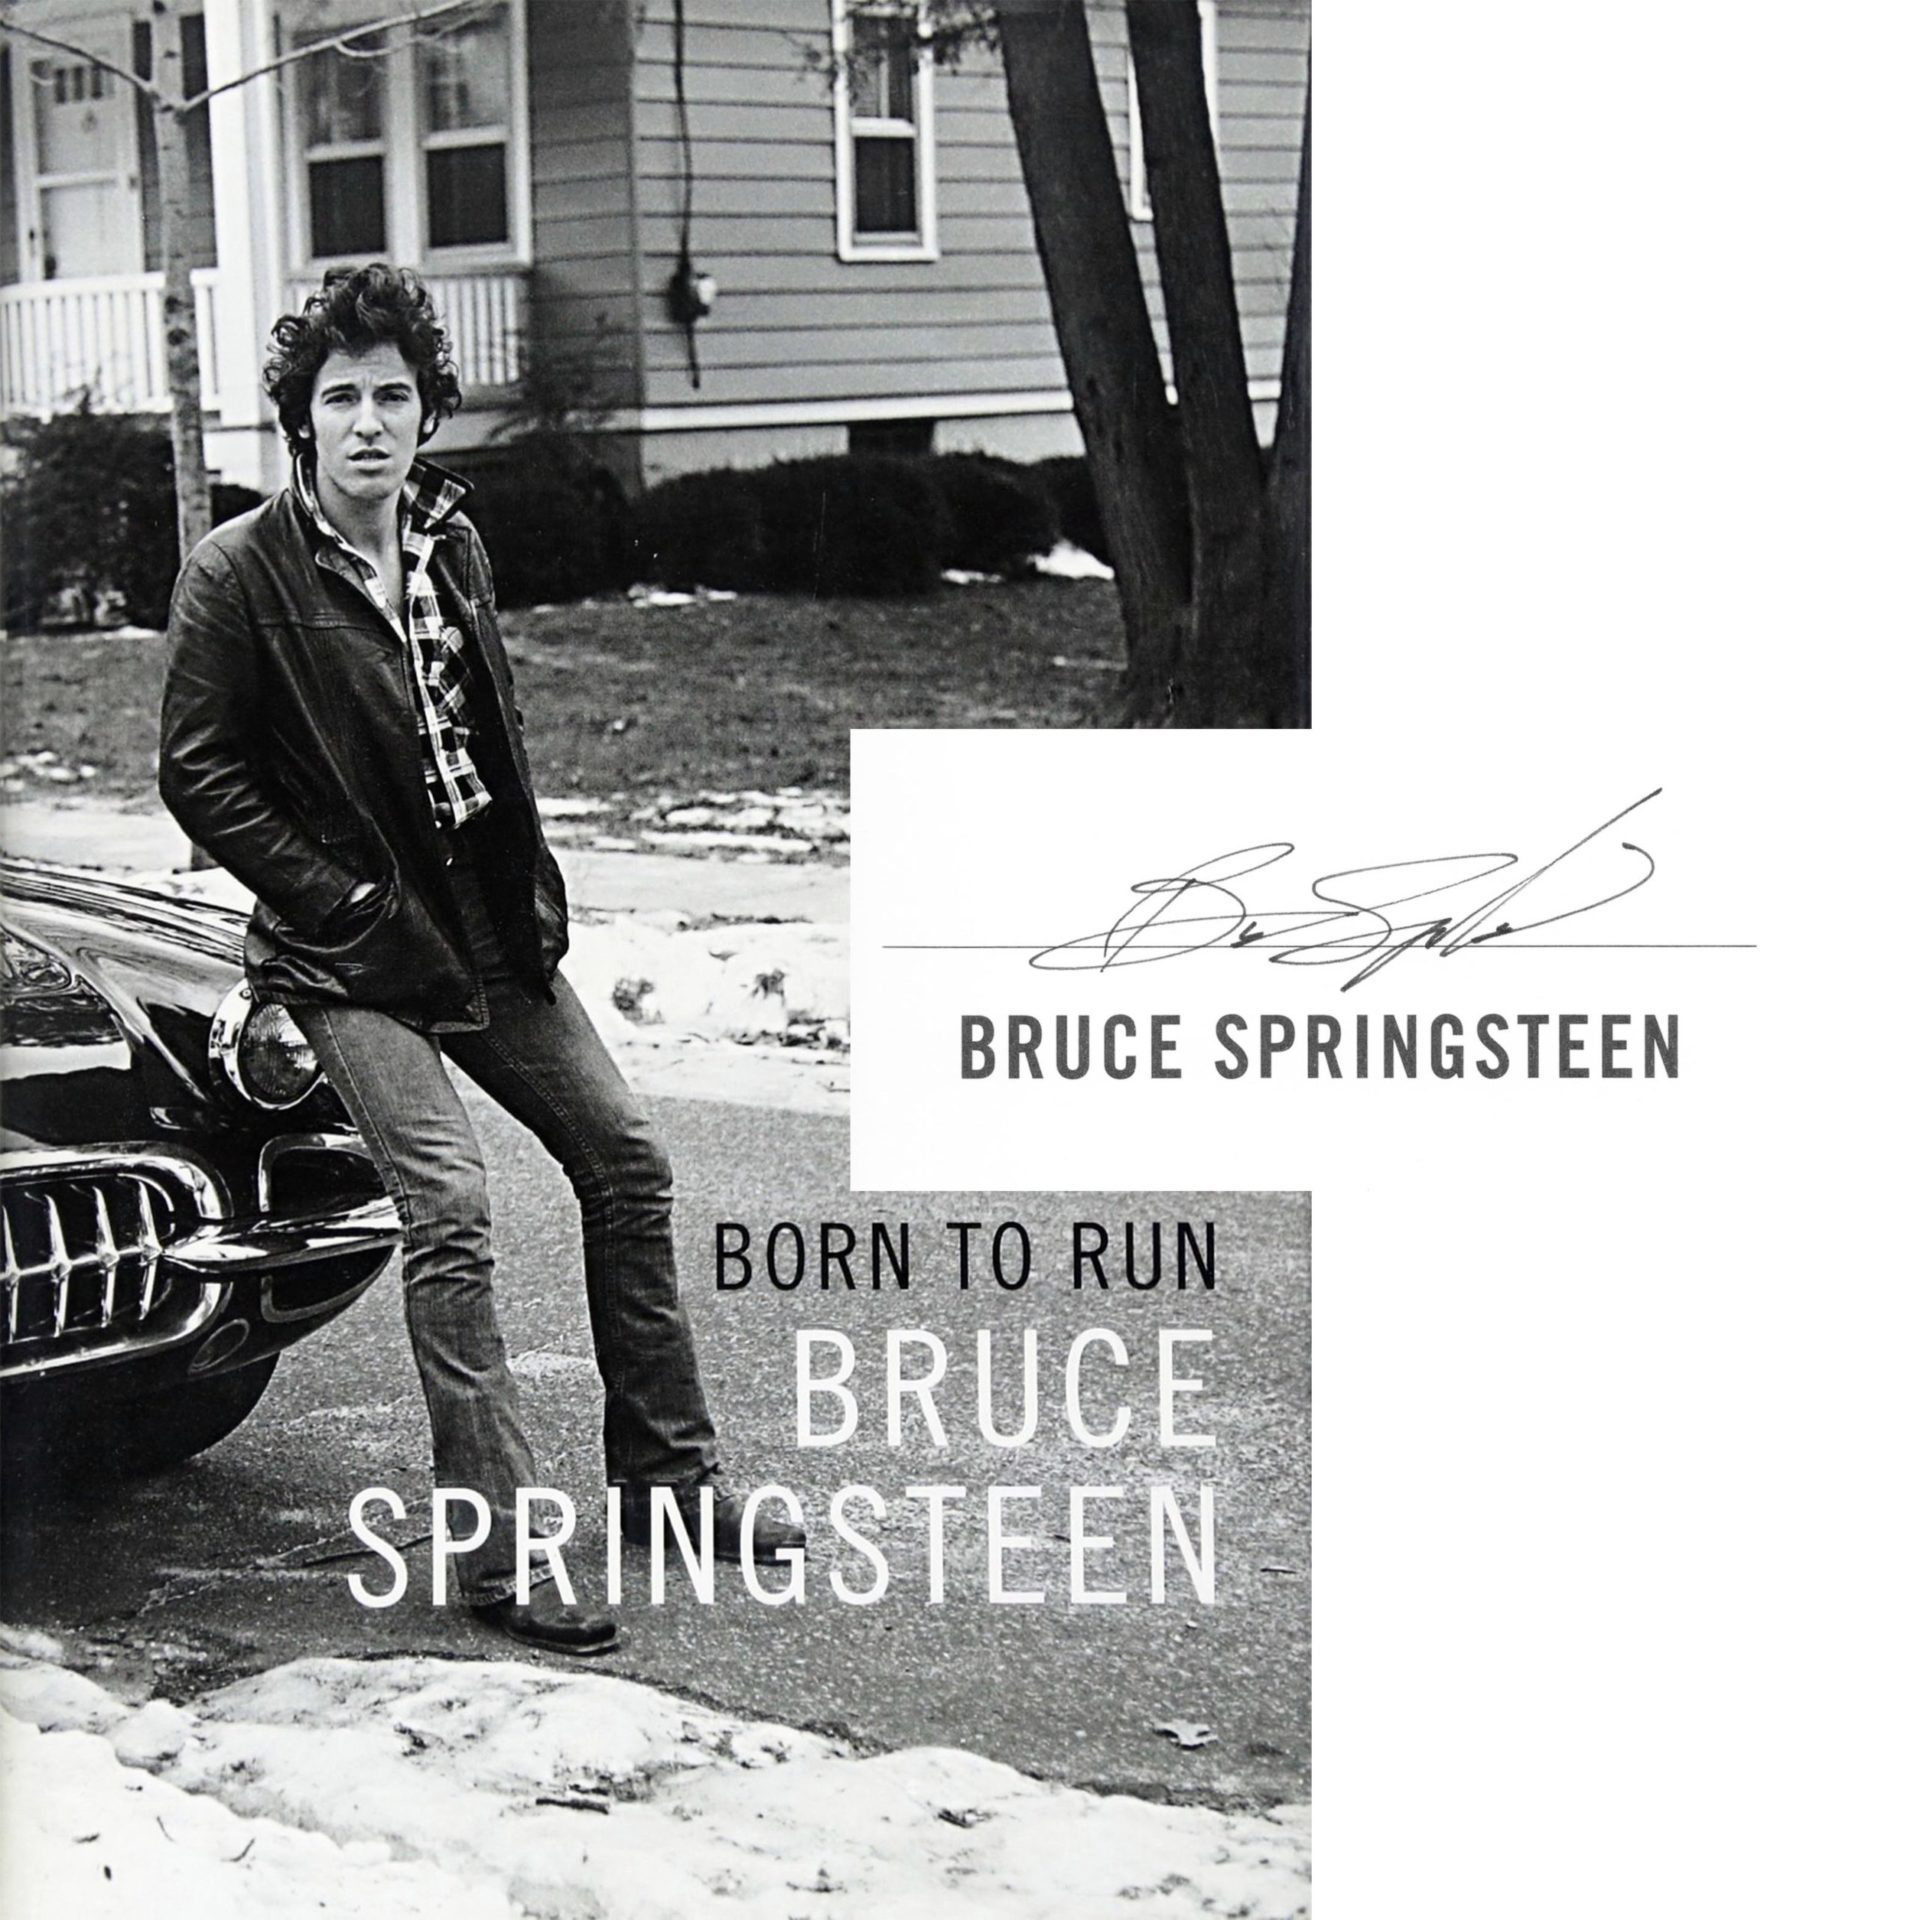 Bruce Springsteen Autographed Signed Born To Run Hardcover Book PSA/DNA Authentic 